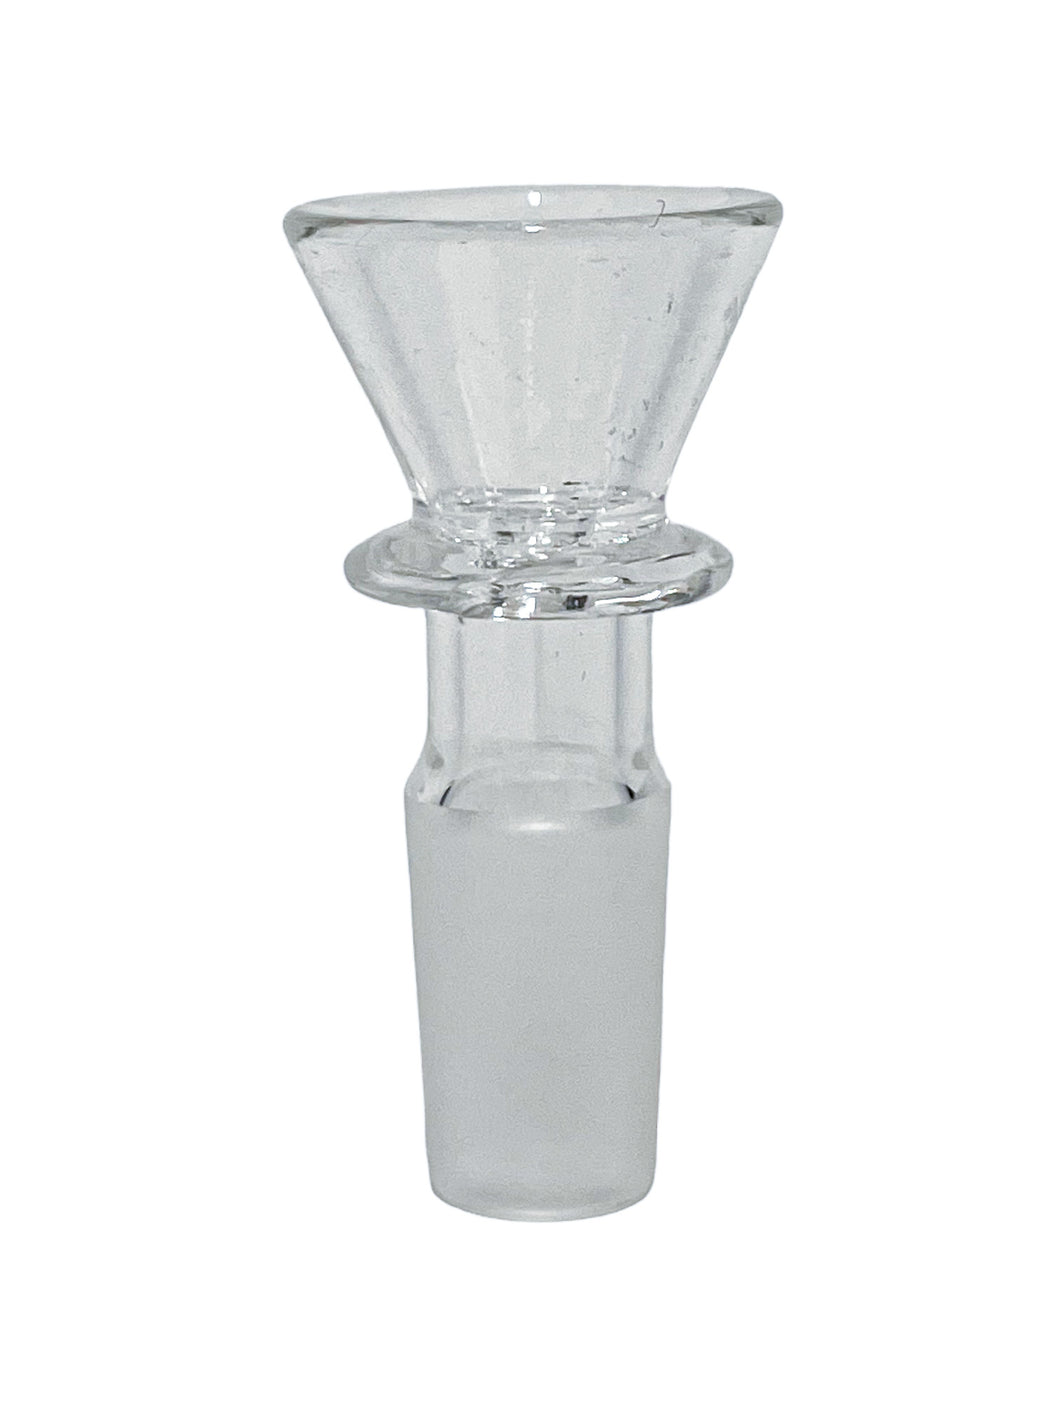 A 14mm Clear Maria Funnel Slide.